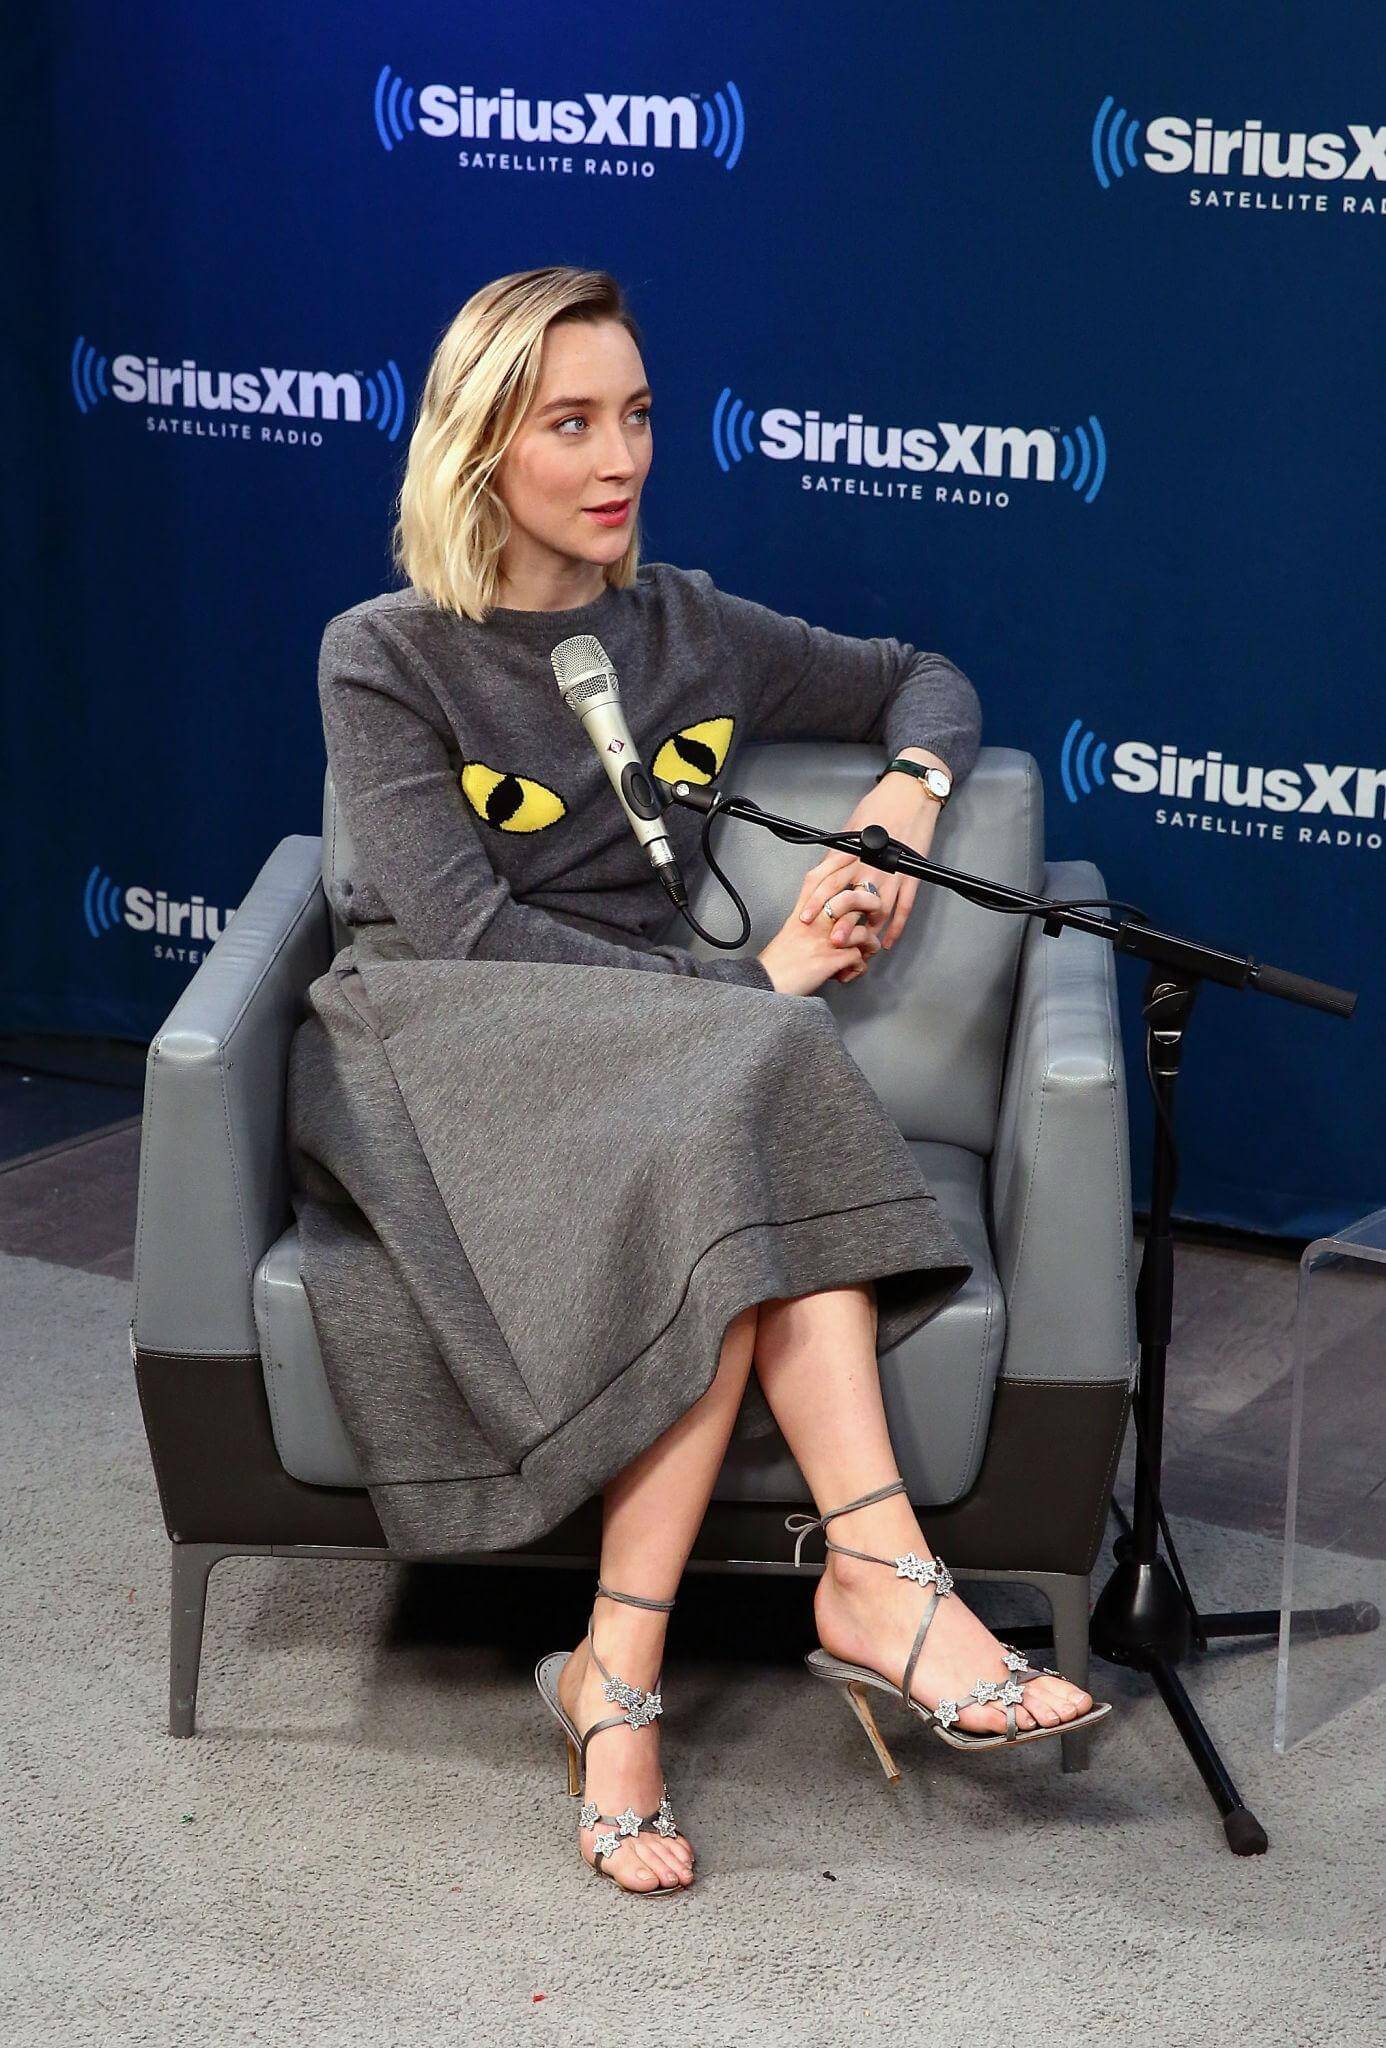 49 Sexy Saoirse Ronan Feet Pictures Will Get You All Sweating | Best Of Comic Books